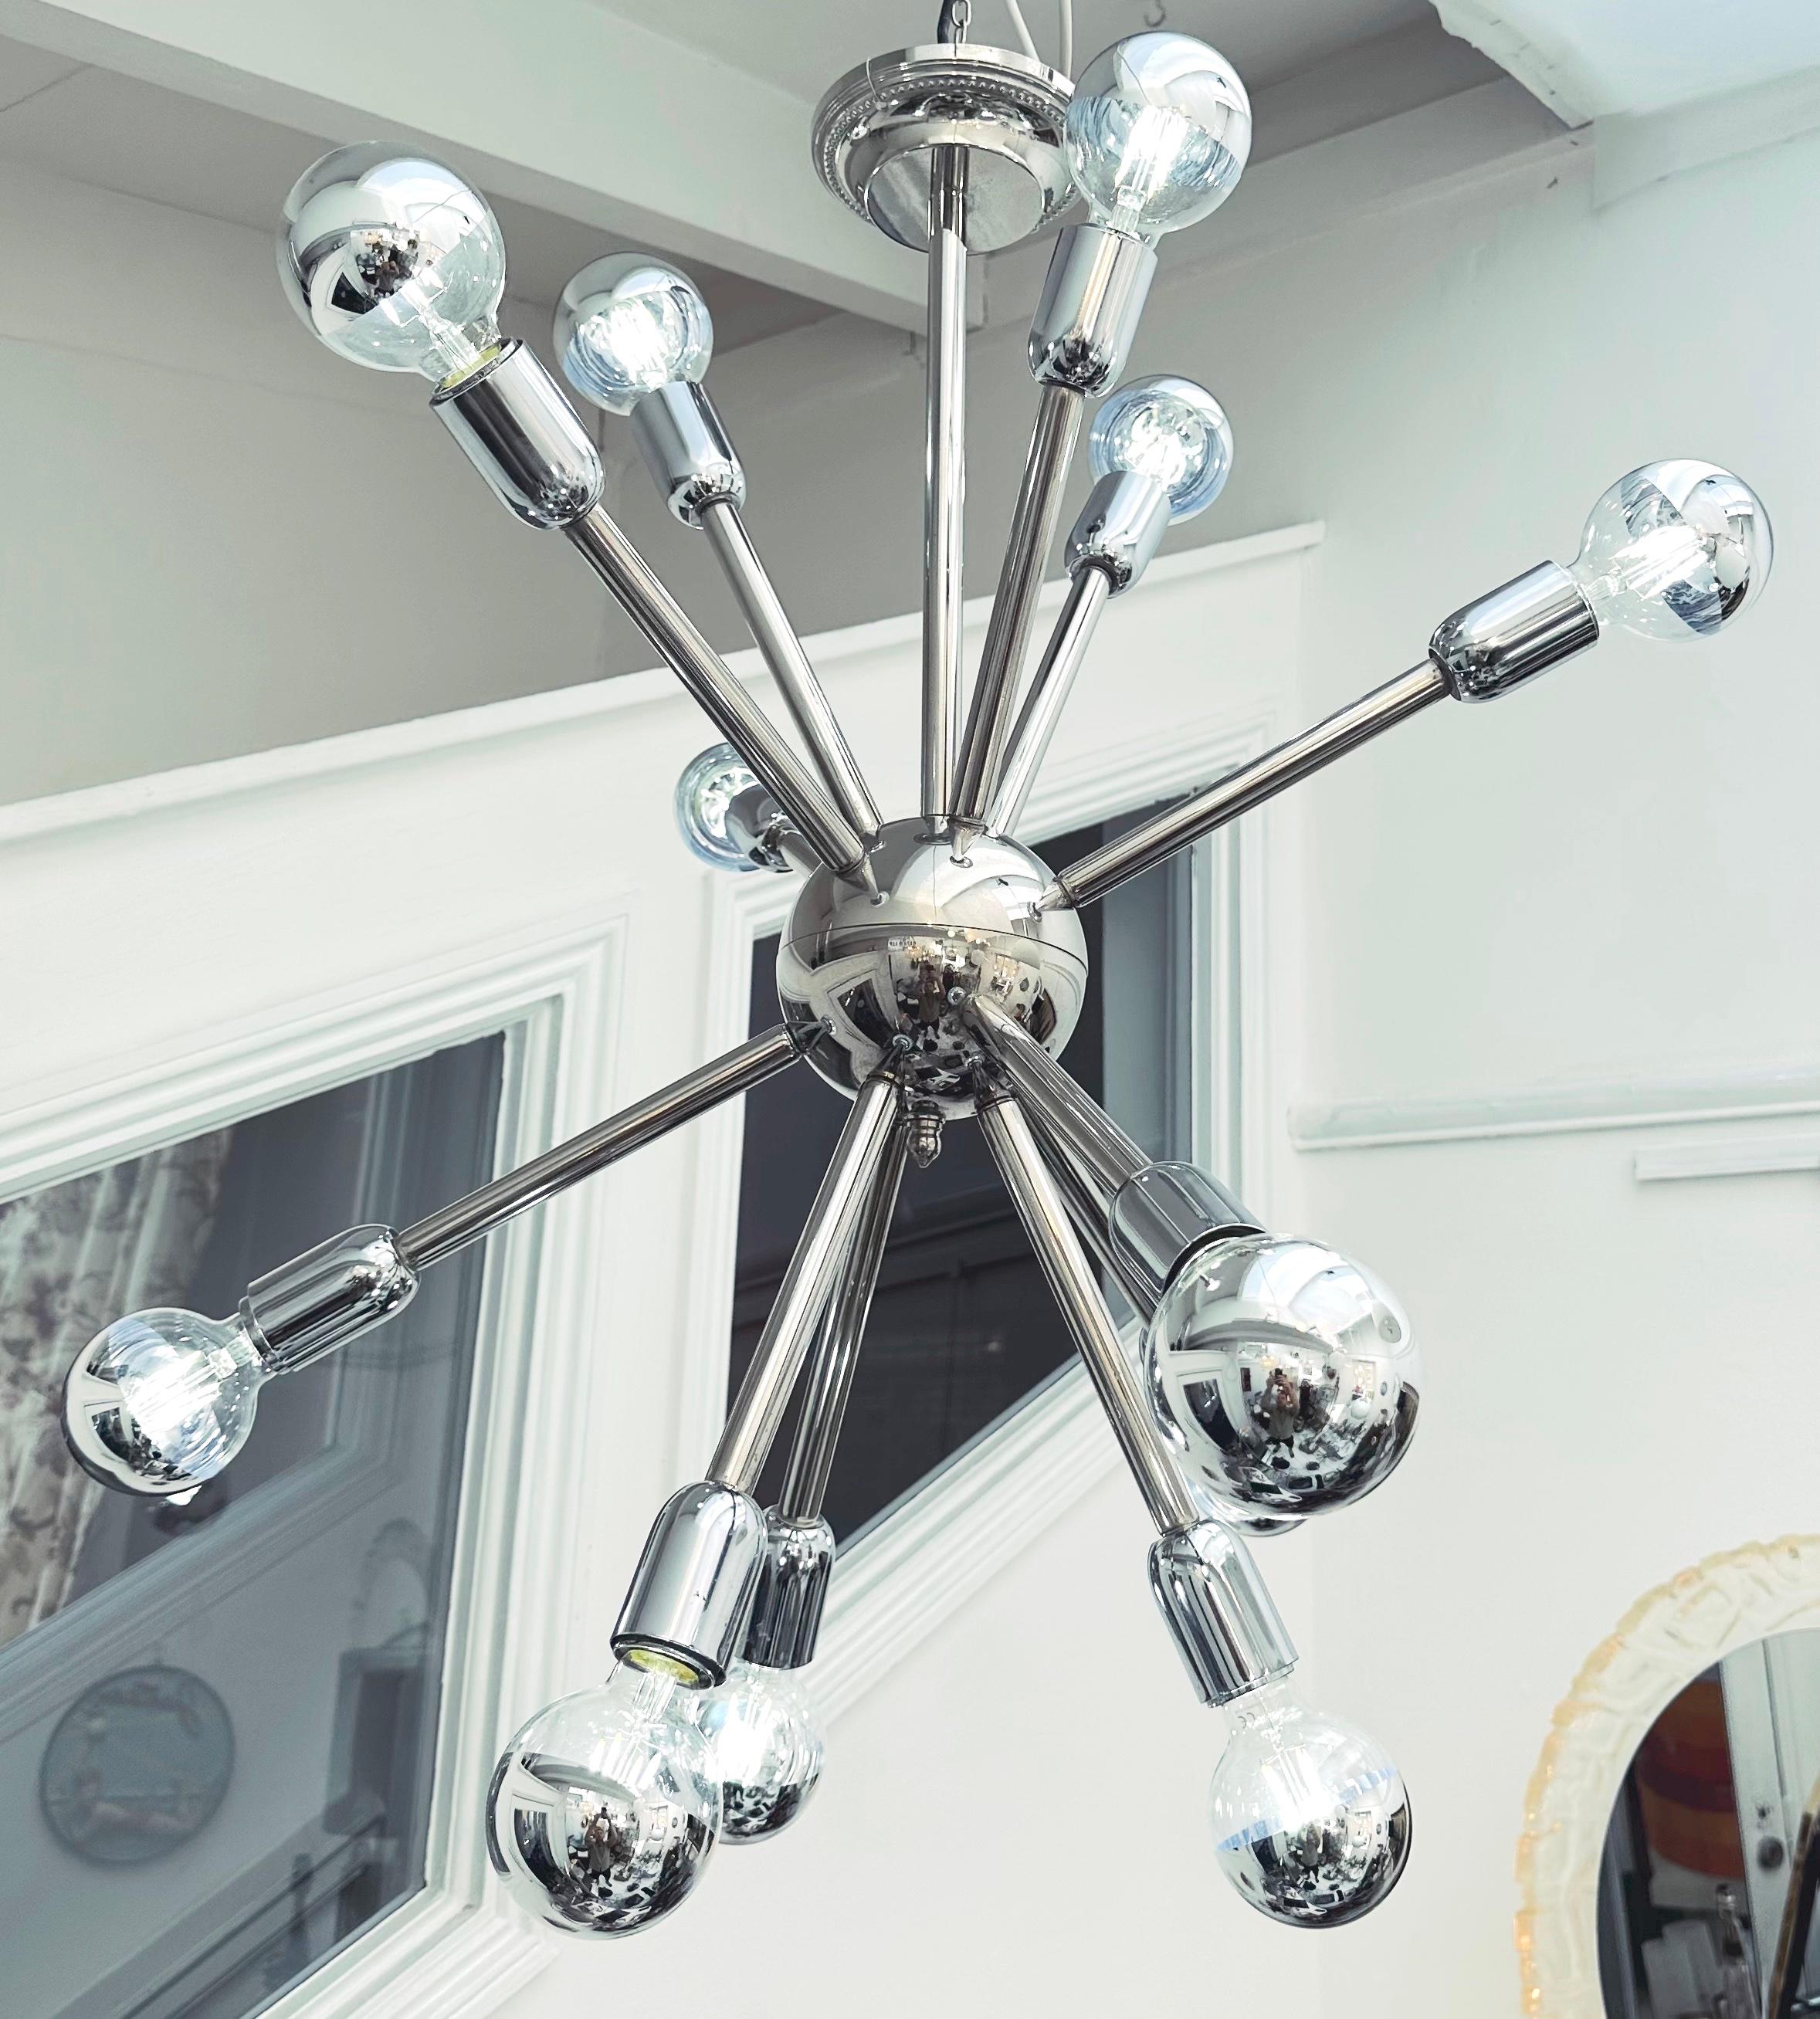 1970s German vintage mid century chrome eleven arm sputnik ceiling light. Each of the chrome-plated steel arms is fixed to a sphere which splits in two to allow access to the internal workings of the light. A further arm connects the sphere to the